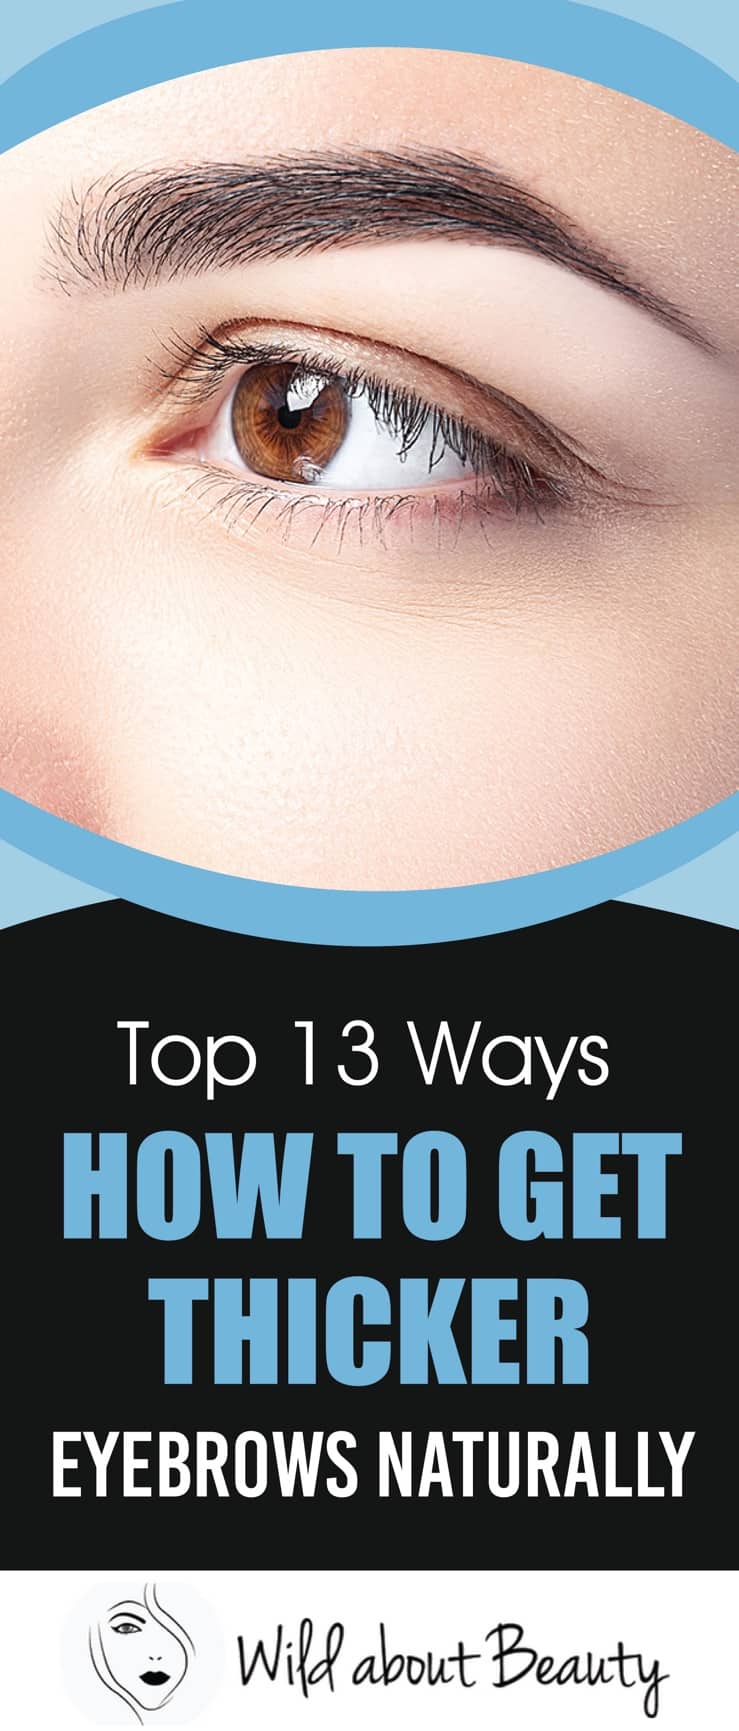 Top 13 Ways How To Get Thicker Eyebrows Naturally